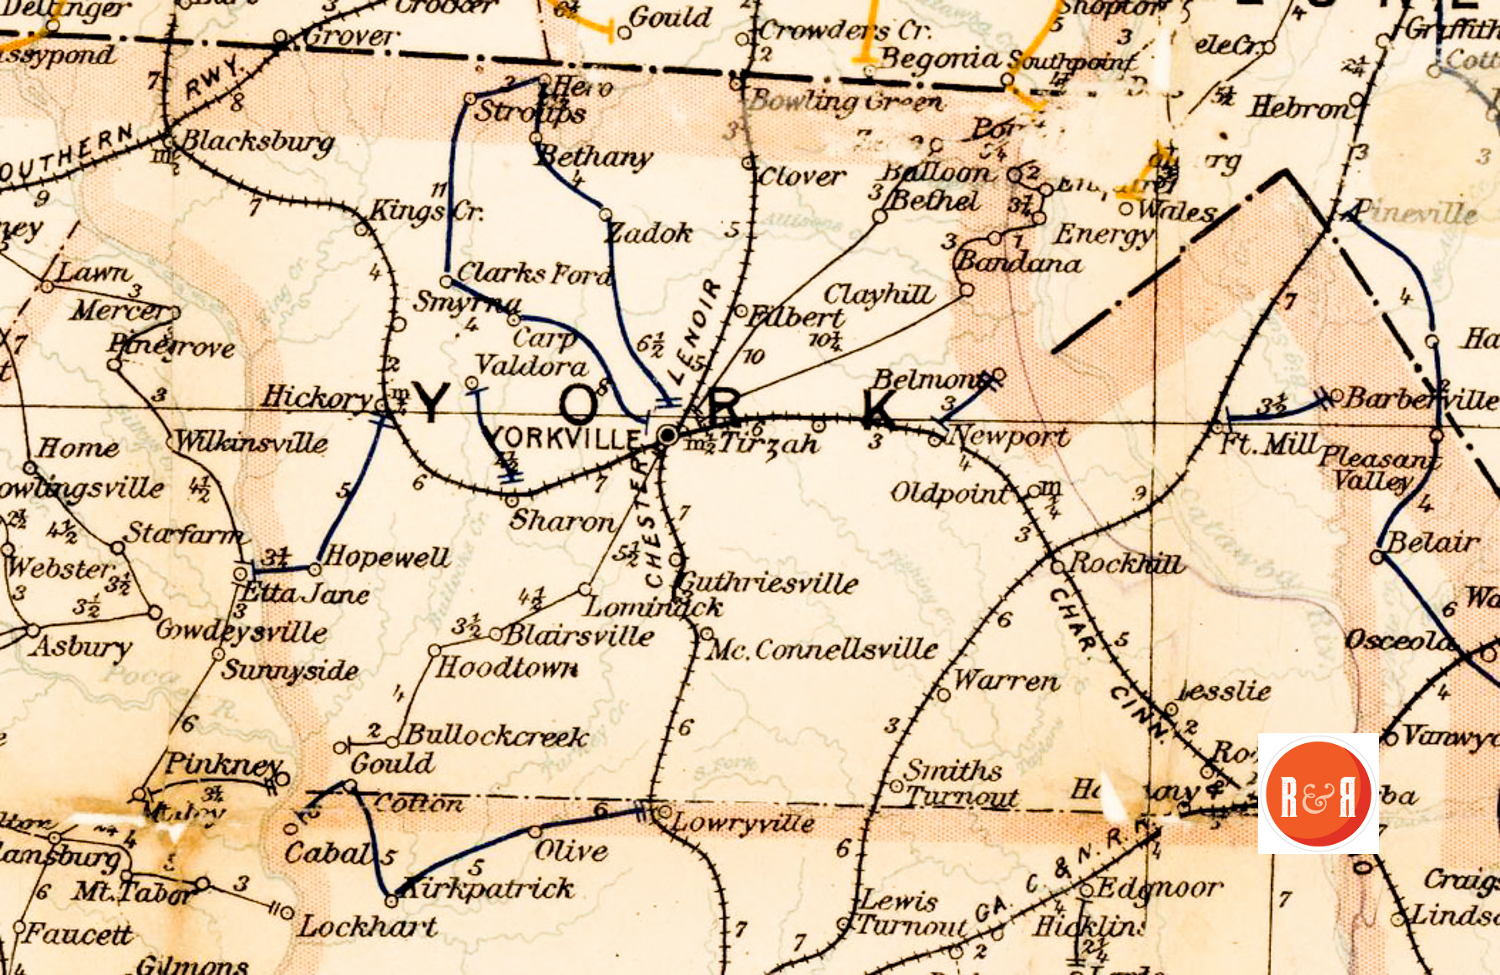 RAILROAD MAP SHOWING HICKORY GROVE SC